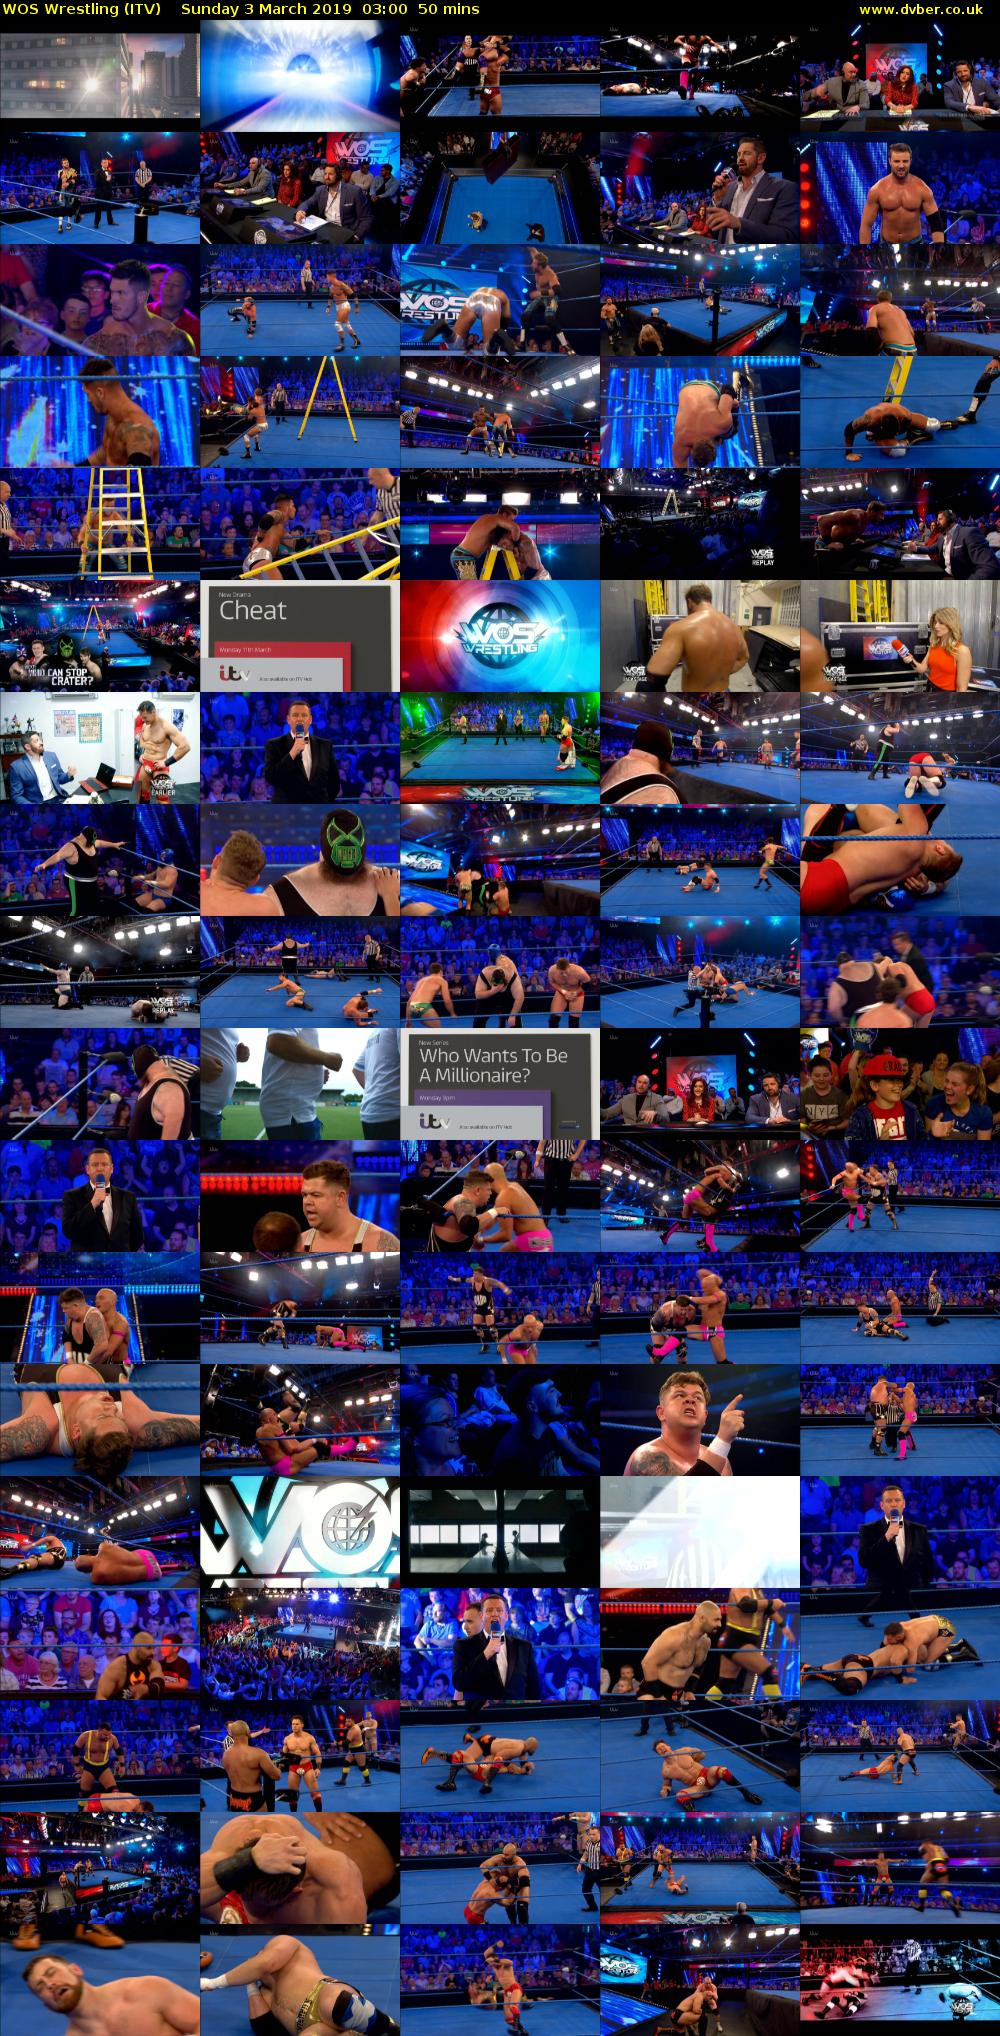 WOS Wrestling (ITV) Sunday 3 March 2019 03:00 - 03:50